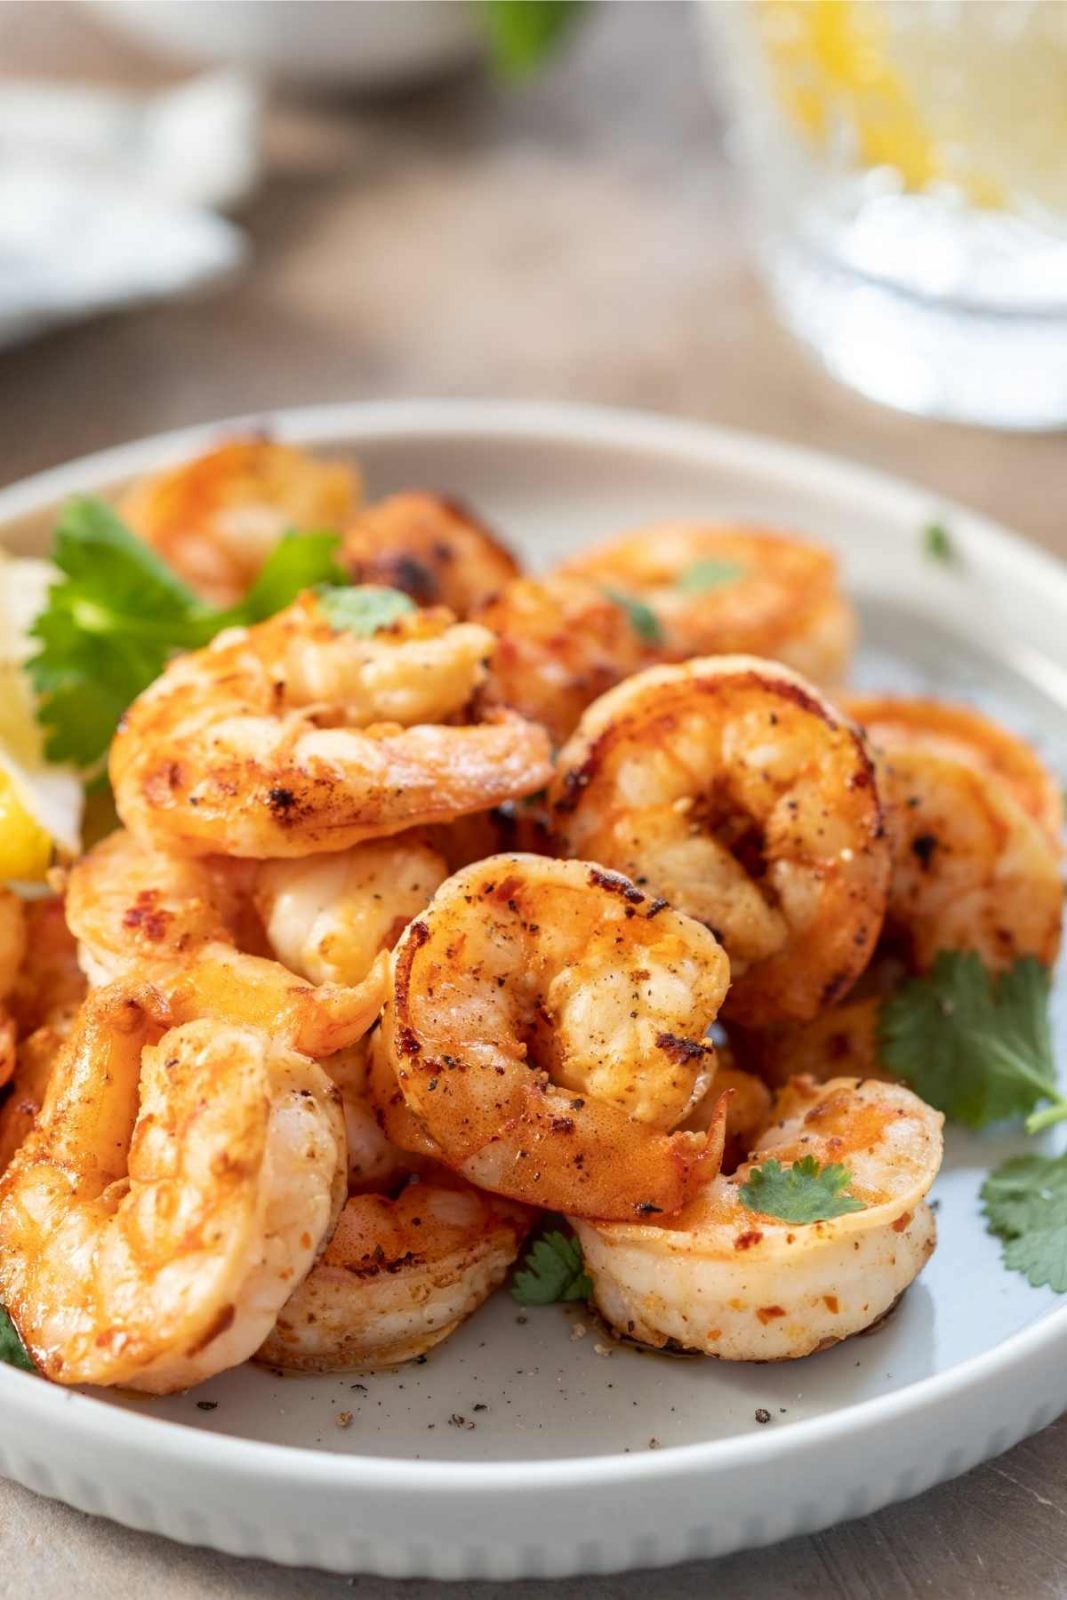 Are you ready to learn how long to bake shrimp at 400 F degrees? Here you will learn all the tips and tricks to making juicy and succulent shrimp in the oven! Be careful though, if you overcook it, you’ll have shrimp that is dry and rubbery. Undercook it and you have a dish that’s unsafe to eat!!